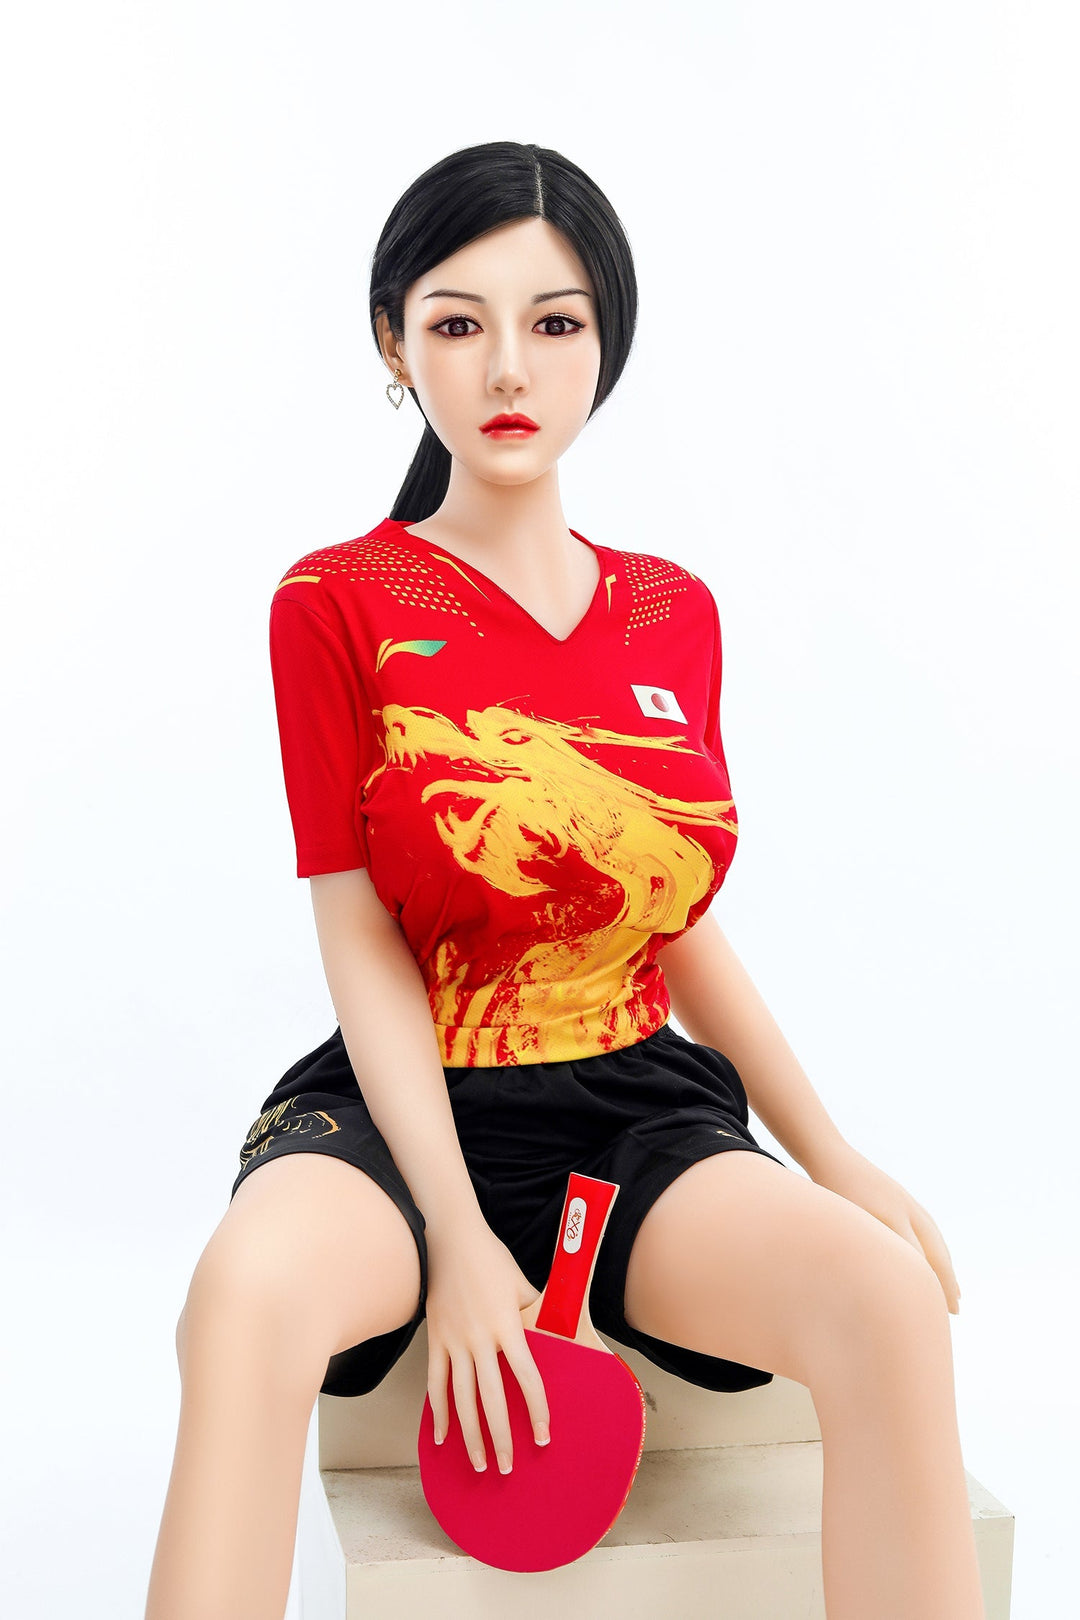 Lily 5ft2in (158cm) Japanese Lady Realistic TPE Sex Doll with Silicone Head